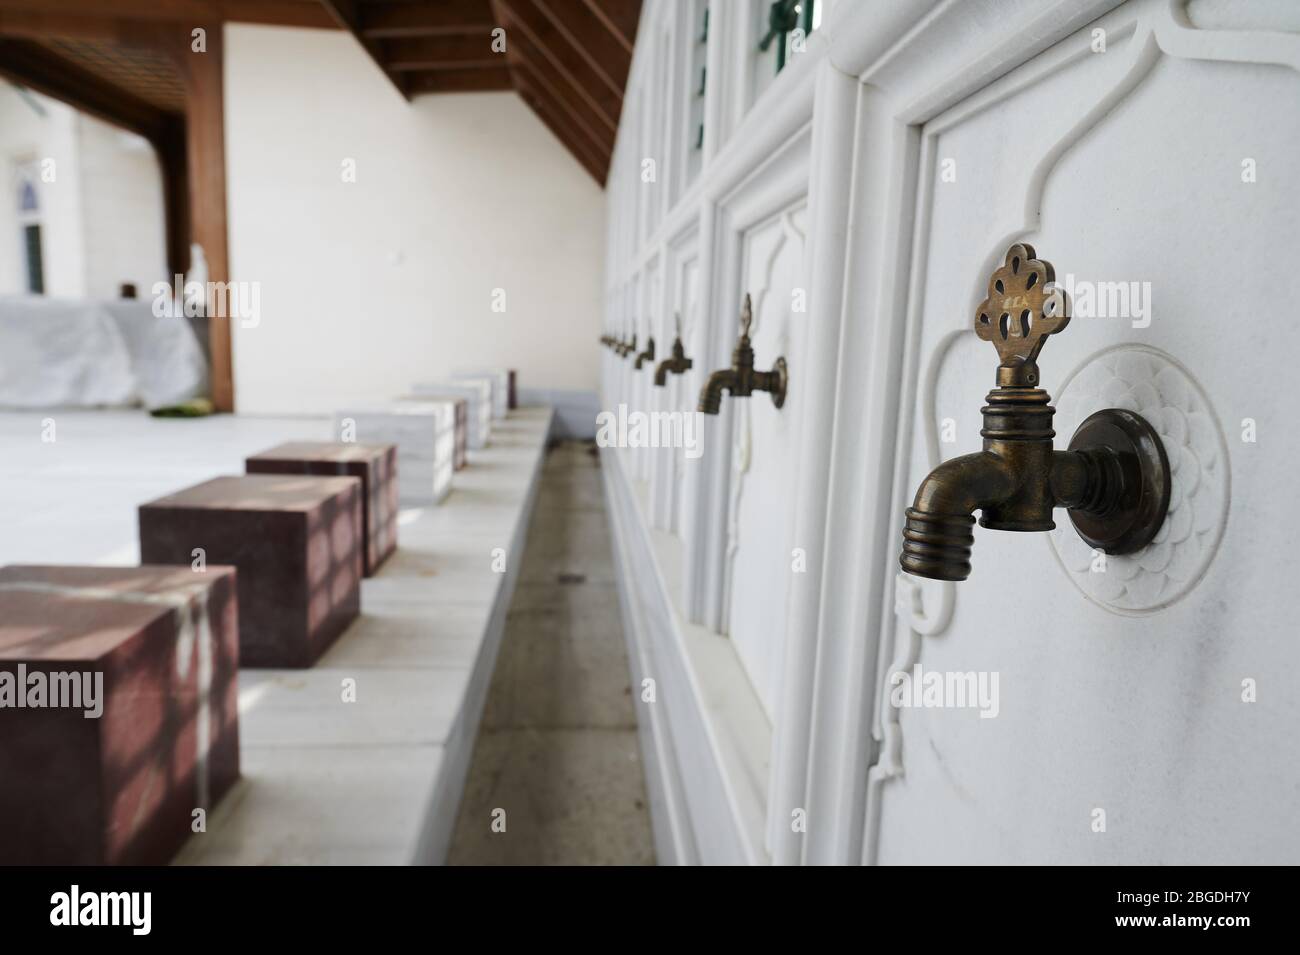 15 April 2020, Berlin: On the balcony of the Sehitlic Mosque there are taps and a basin to wash feet. The mosque takes its name from the Turkish cemetery on the grounds. The historical cemetery has been in existence since 1866, when it was a diplomatic cemetery. Photo: Annette Riedl/dpa-Zentralbild/ZB Stock Photo